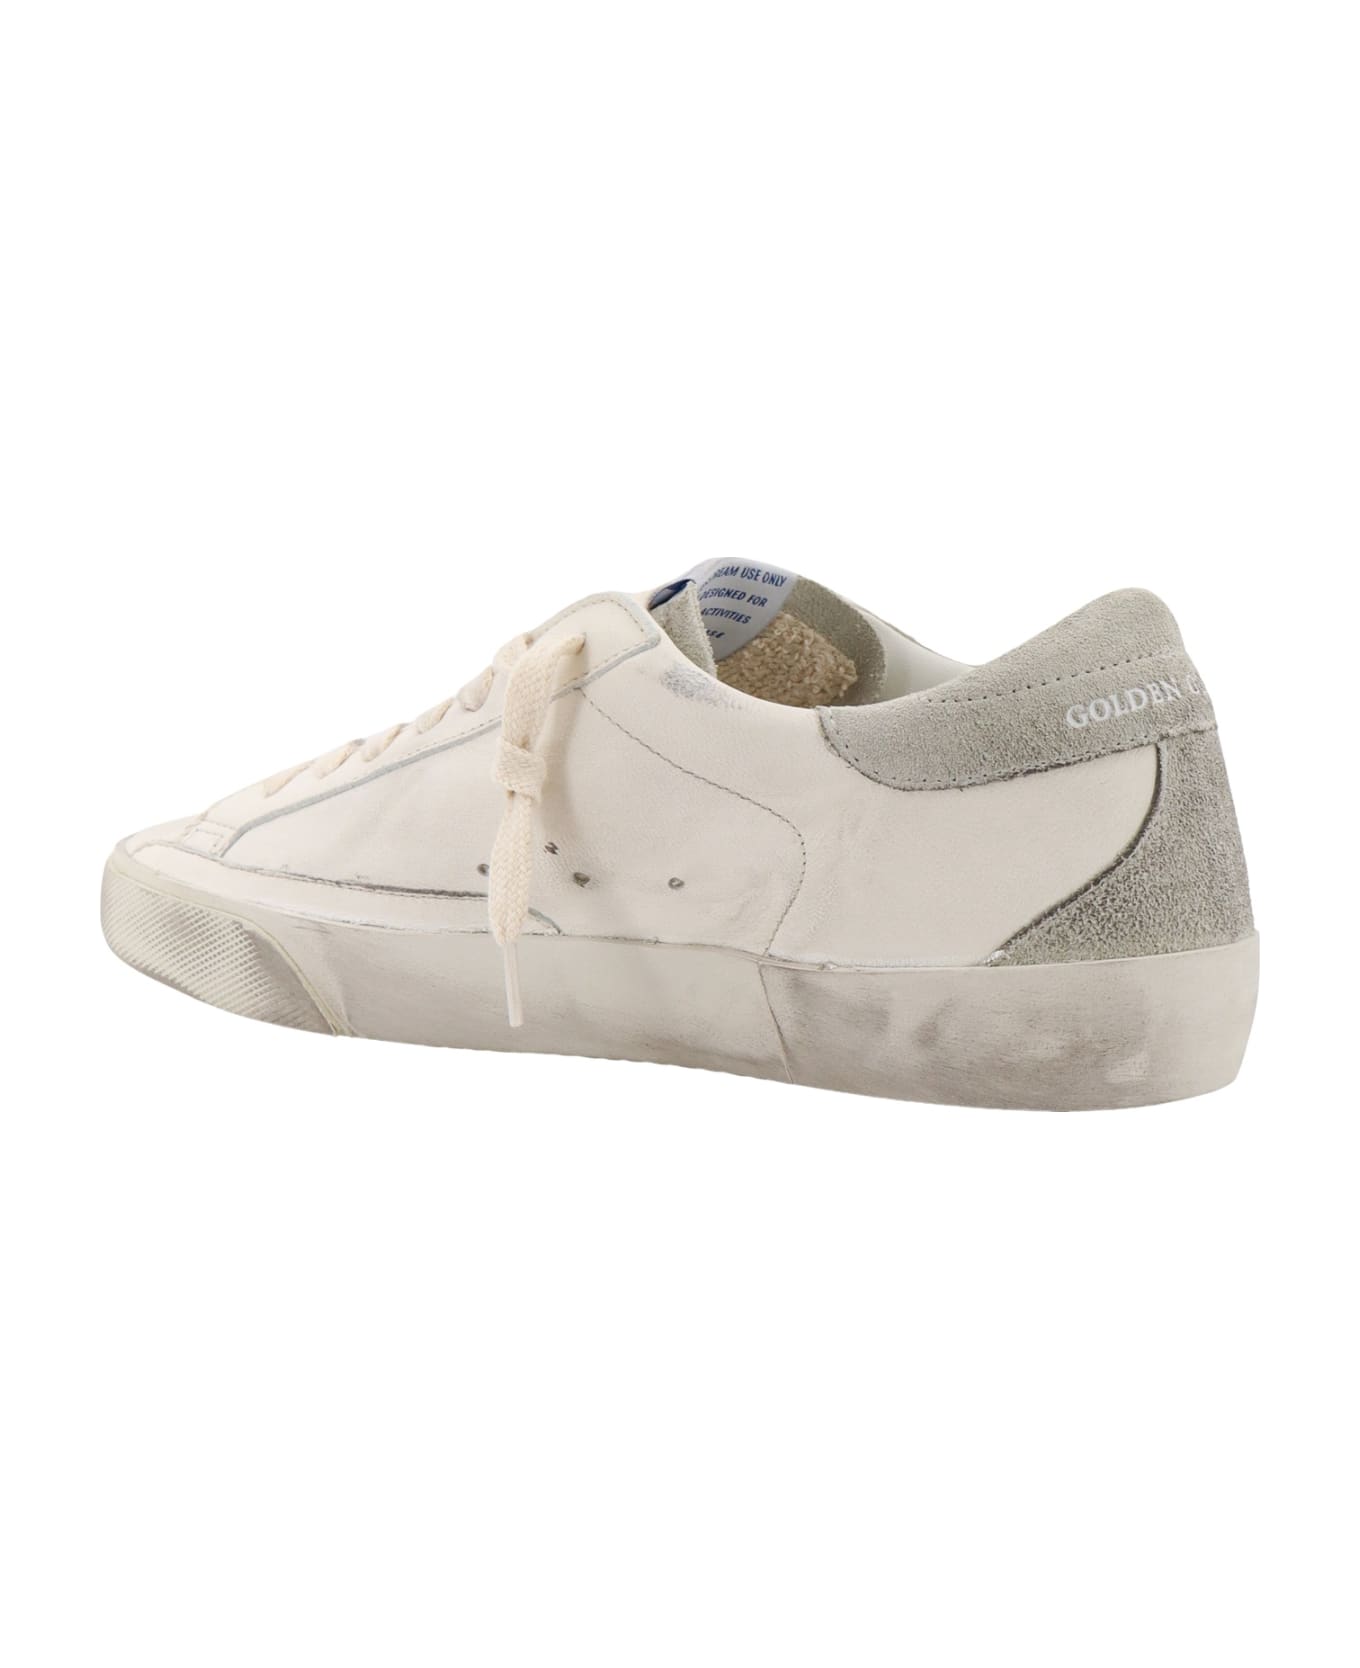 Golden Goose Superstar Classic Leather Sneakers - White スニーカー